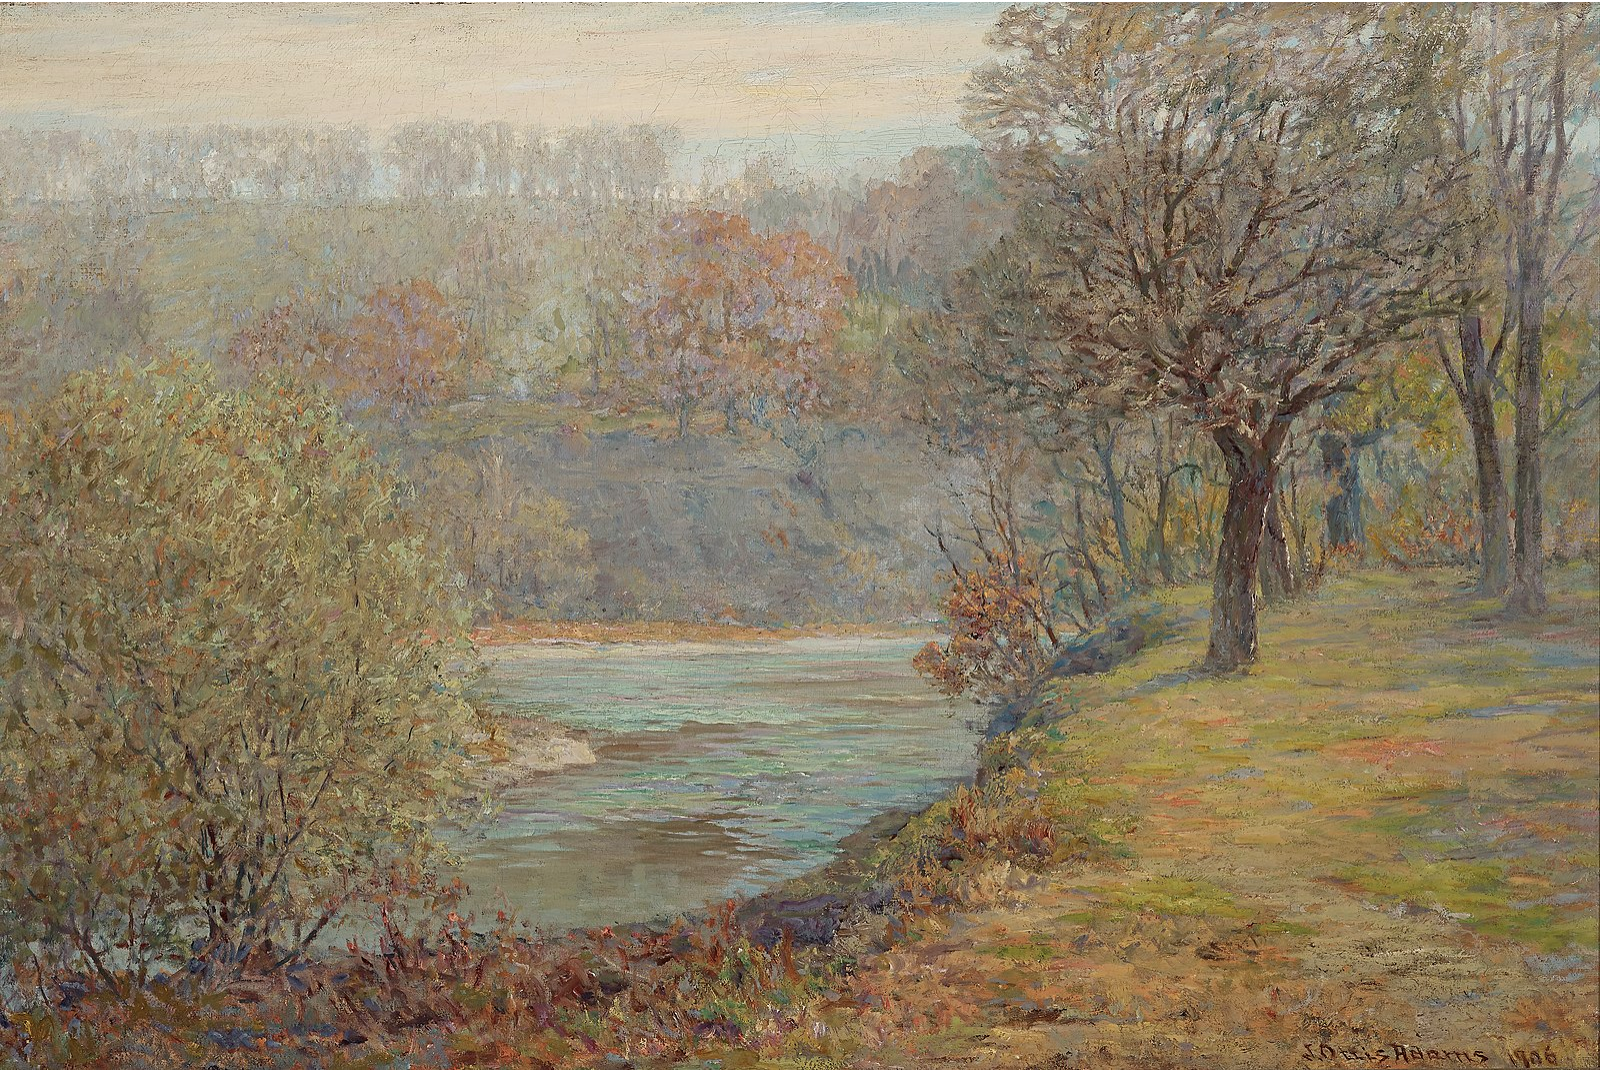 Oil painting of a landscape with trees and a river.